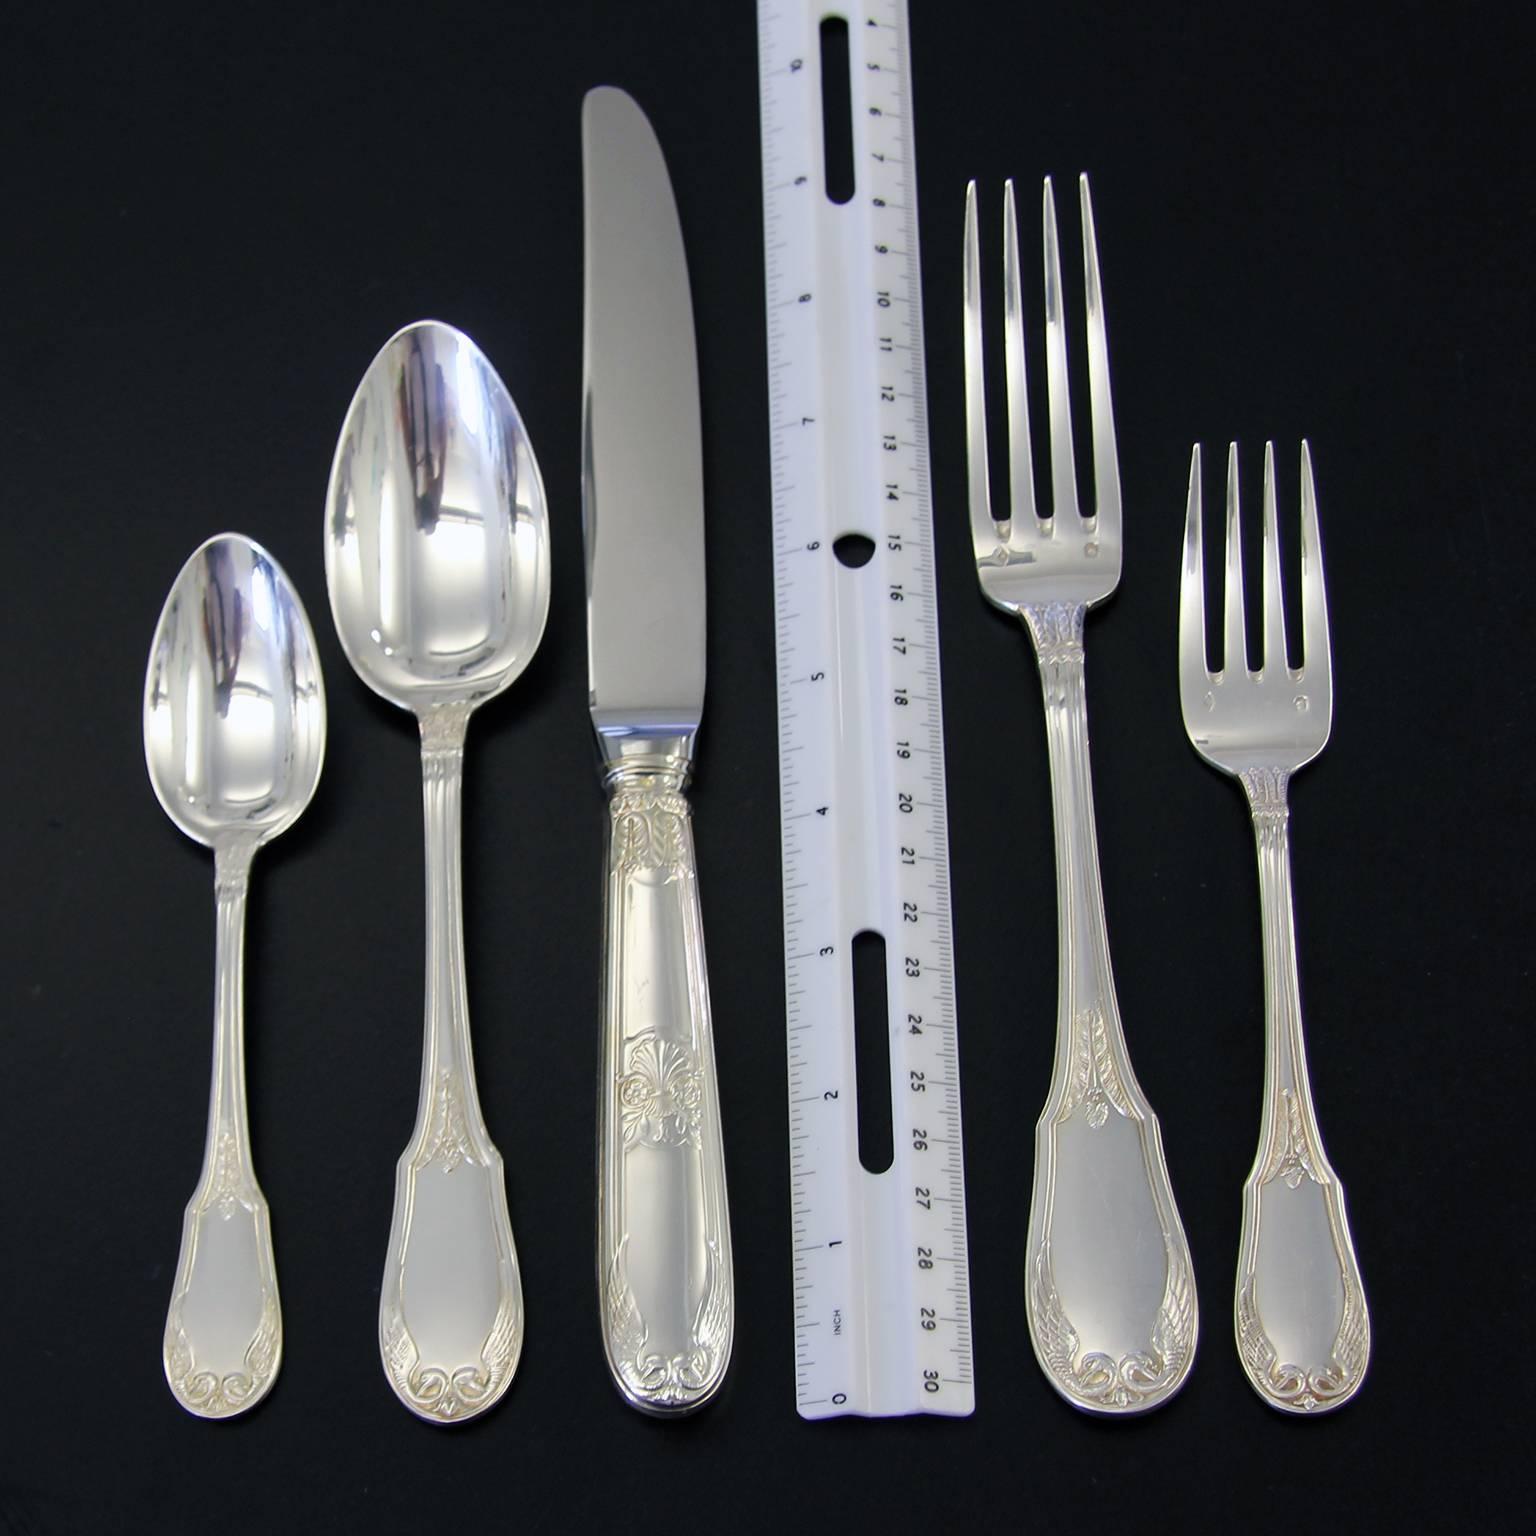 French Elegant Sterling Flatware Set for 6 by Ercuis of Paris in Empire Pattern